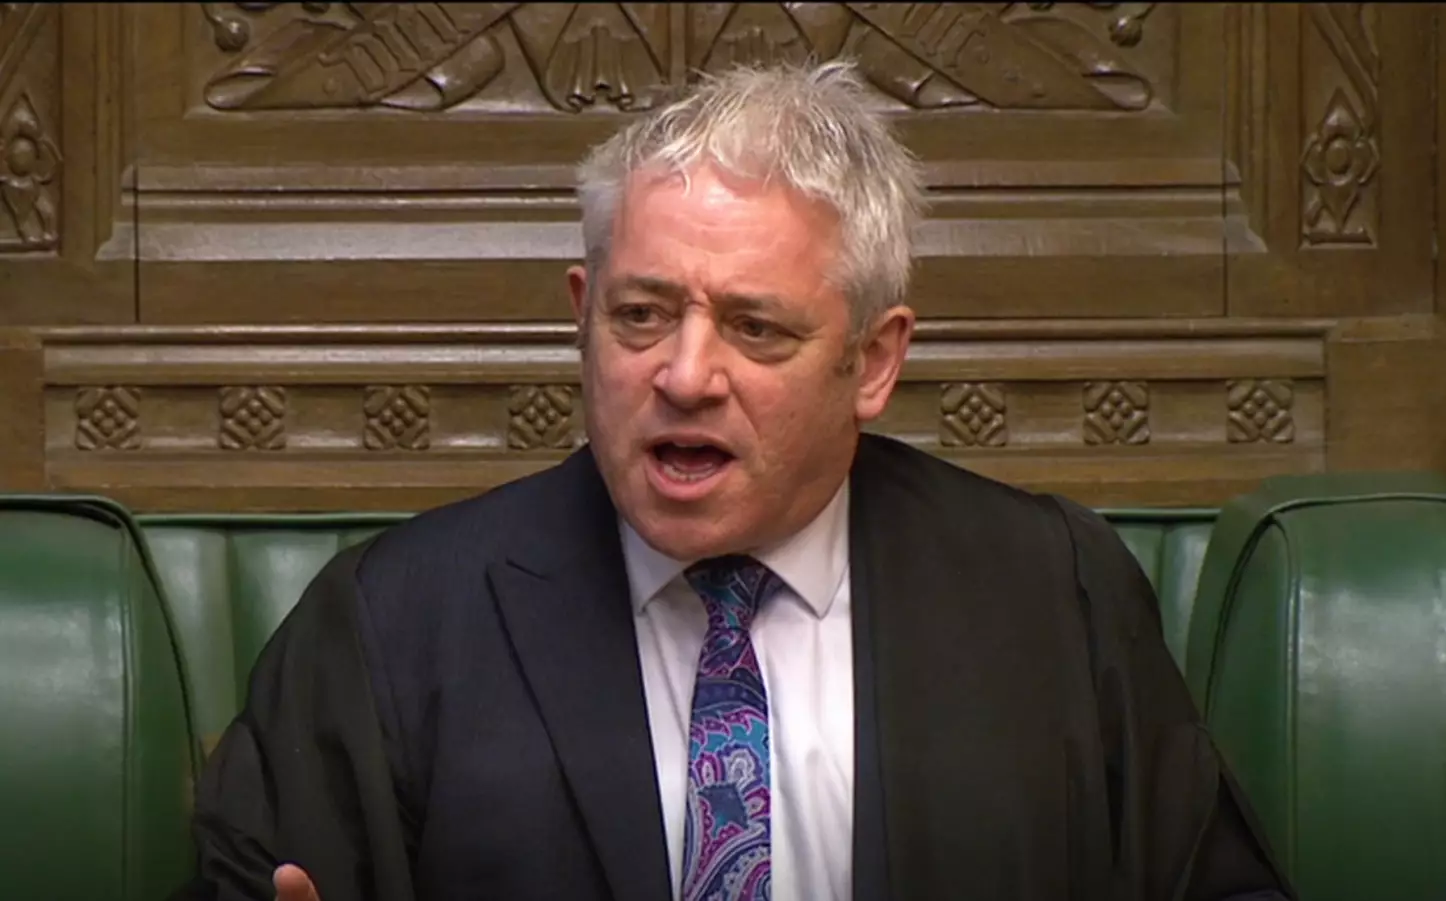 Speaker John Bercow ruled that the vote must be different this time.